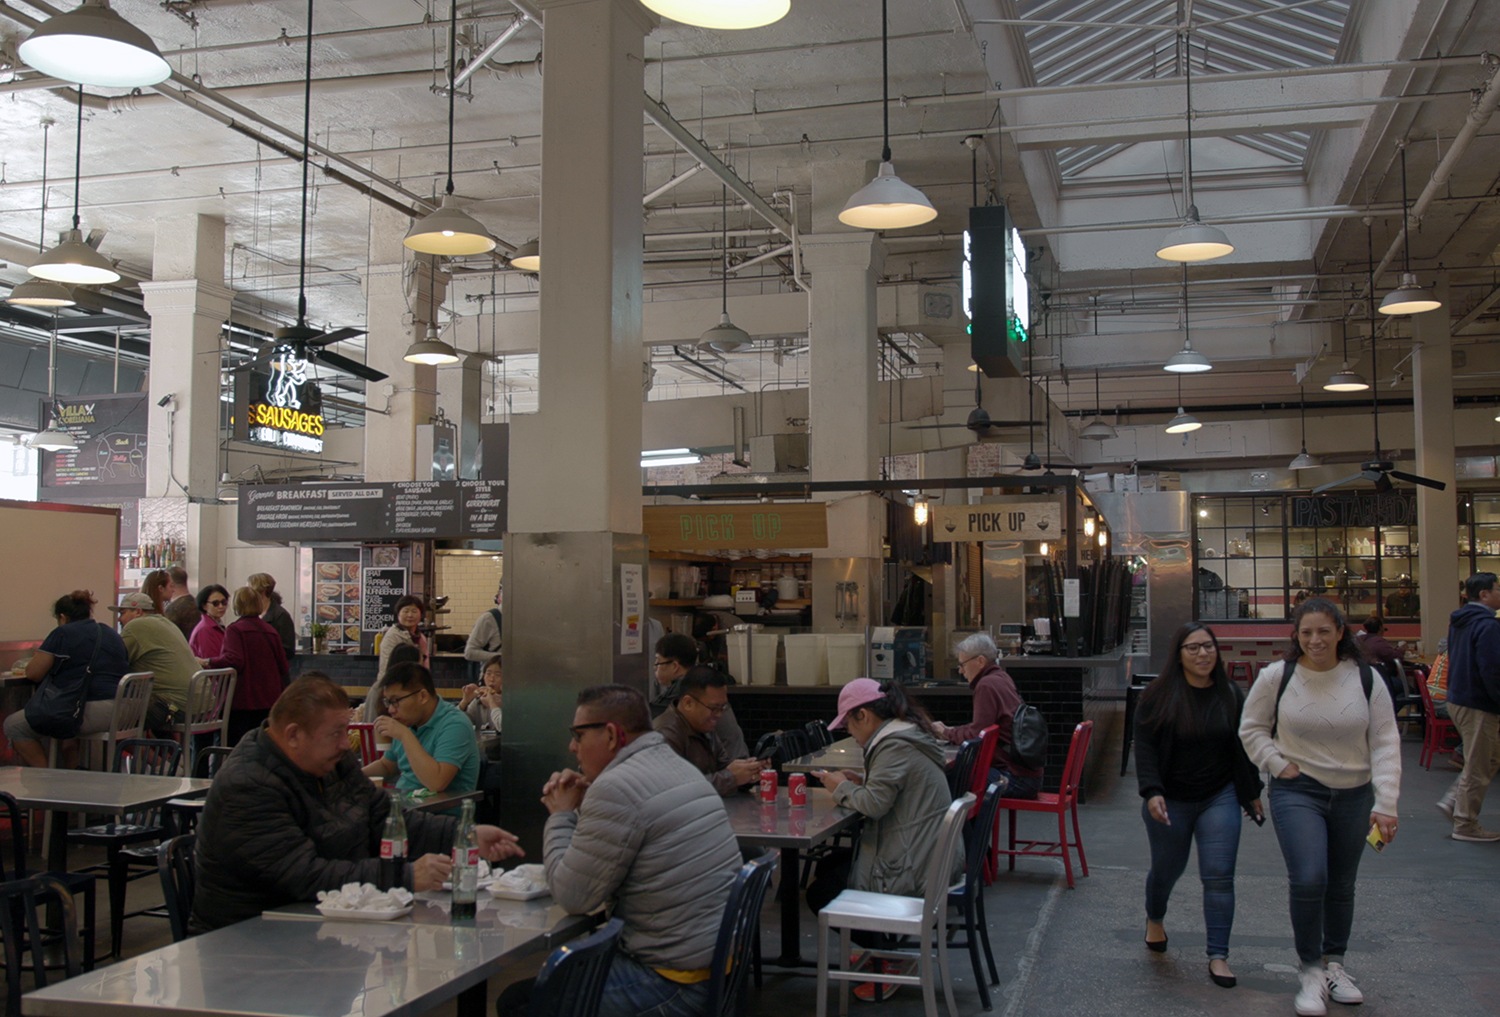 Seating at Grand Central Market in Los Angeles (March 2020)